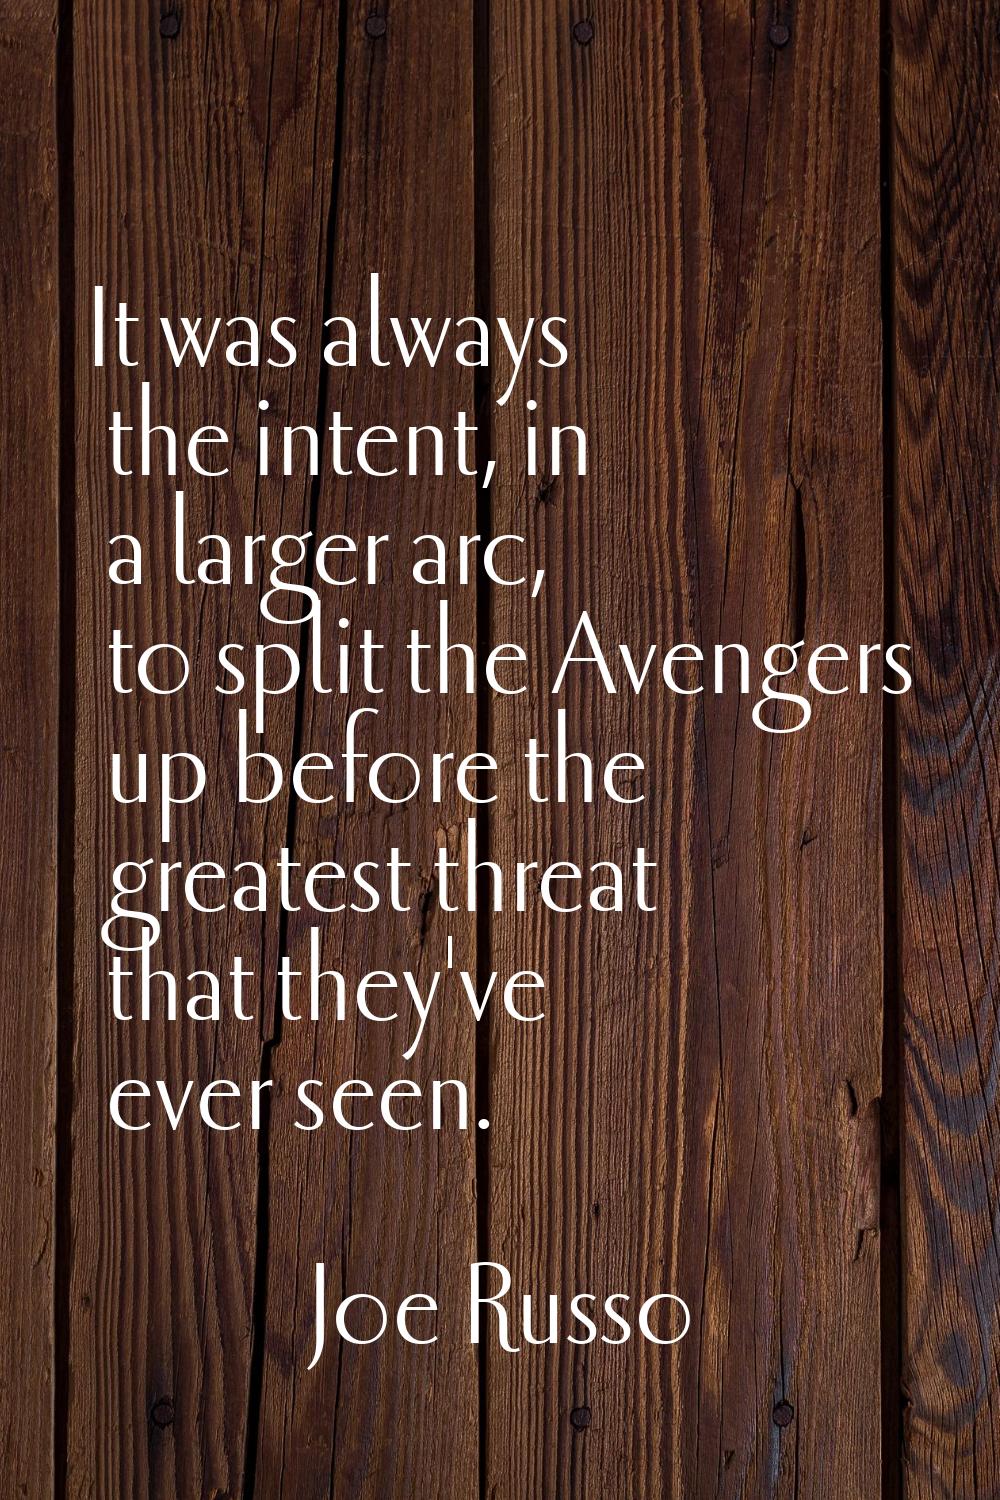 It was always the intent, in a larger arc, to split the Avengers up before the greatest threat that